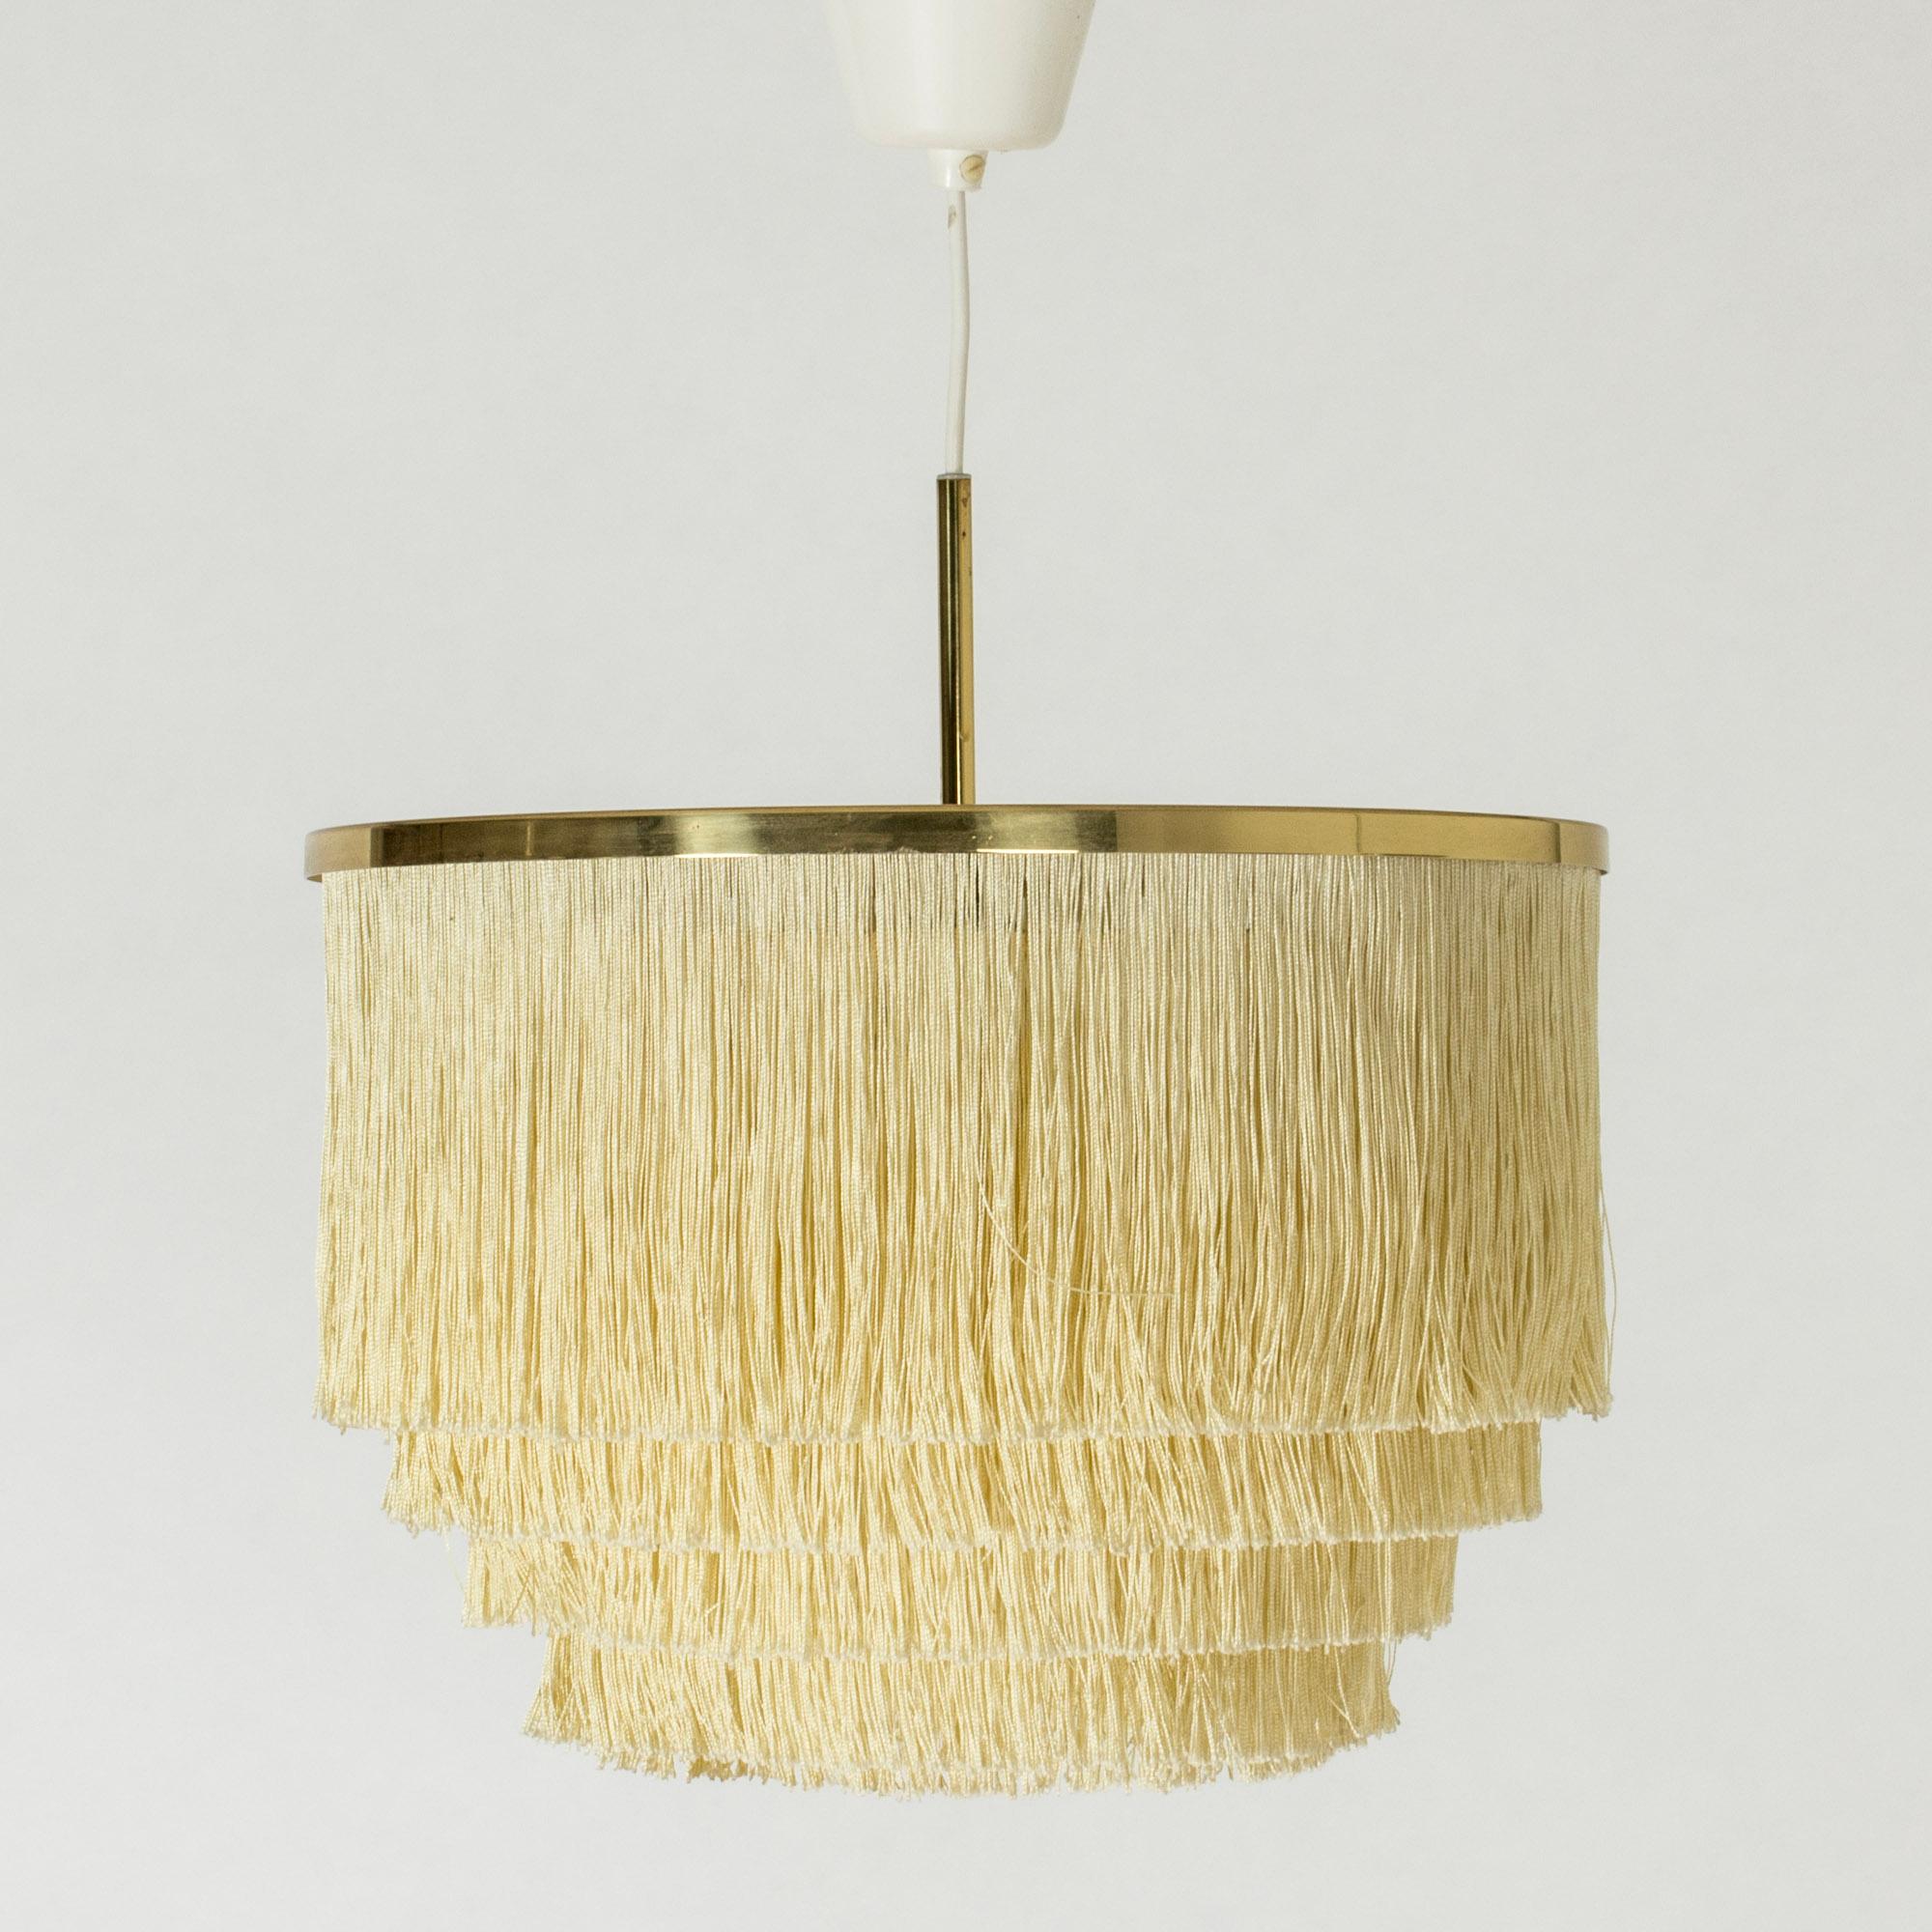 Cool “Fringe” ceiling lamp by Hans-Agne Jakobsson, made from brass. Drapes of textile chords are suspended in layers from shade. Perfect boudoir lighting.